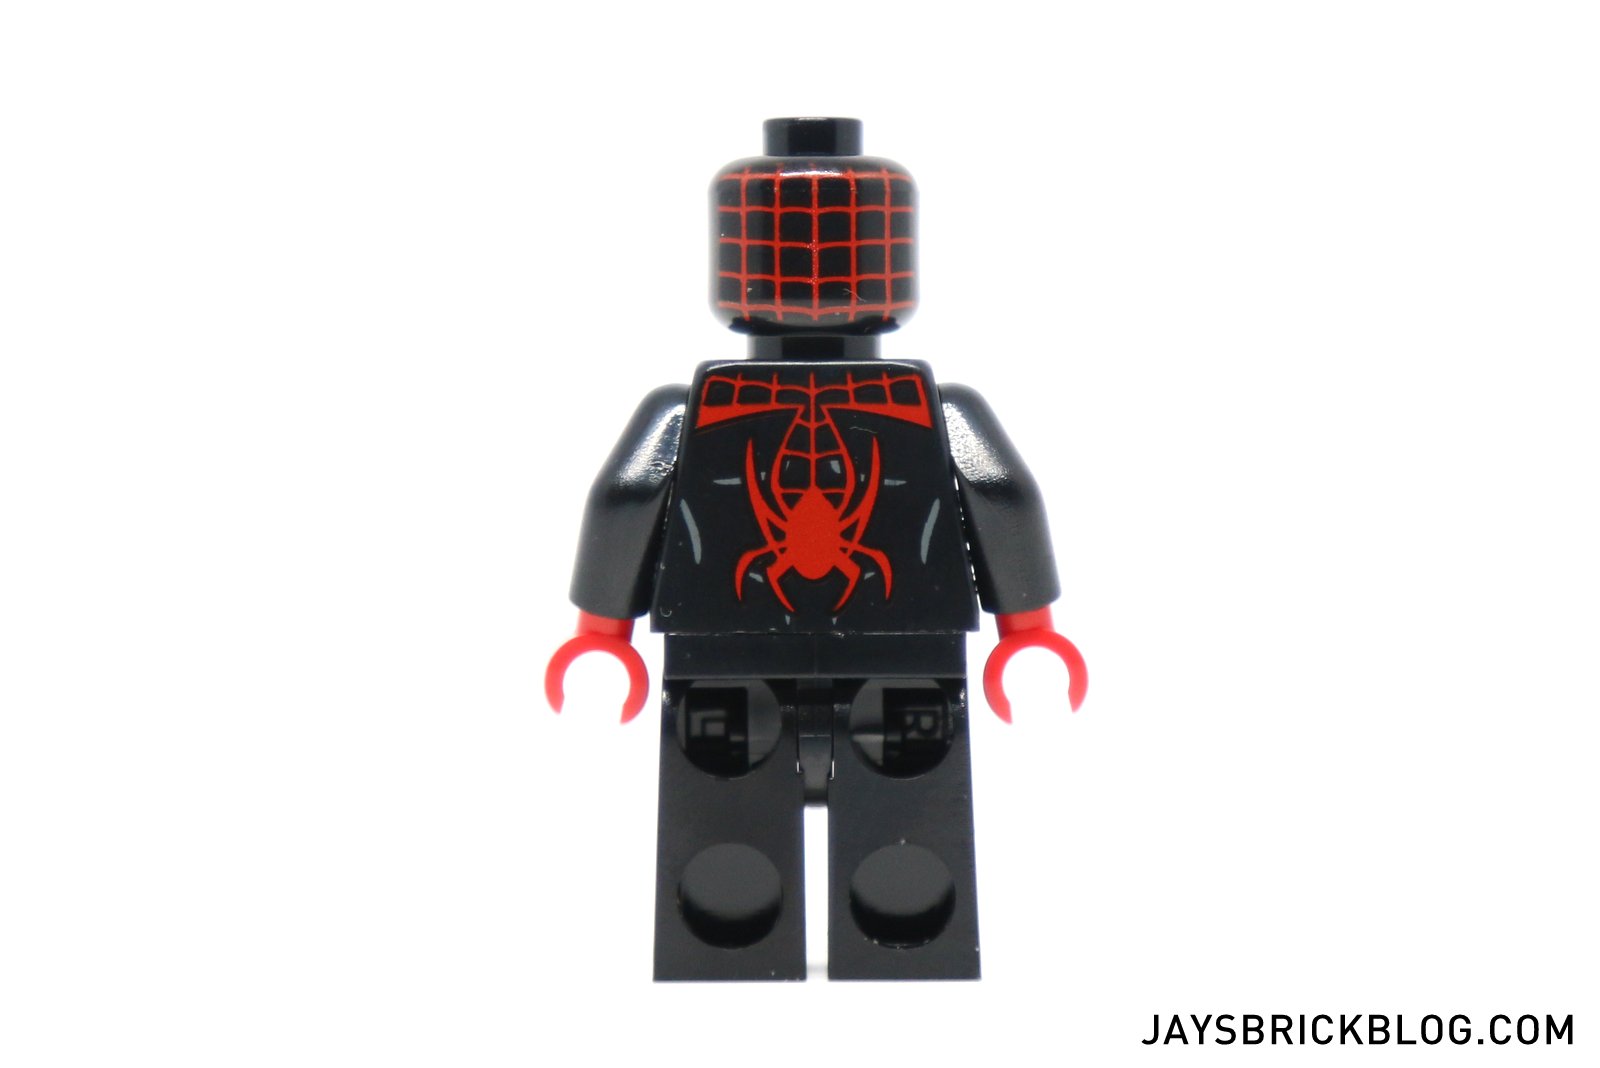 Lego Miles Morales Spider-man Minifigure 76036 Loose New 2015 